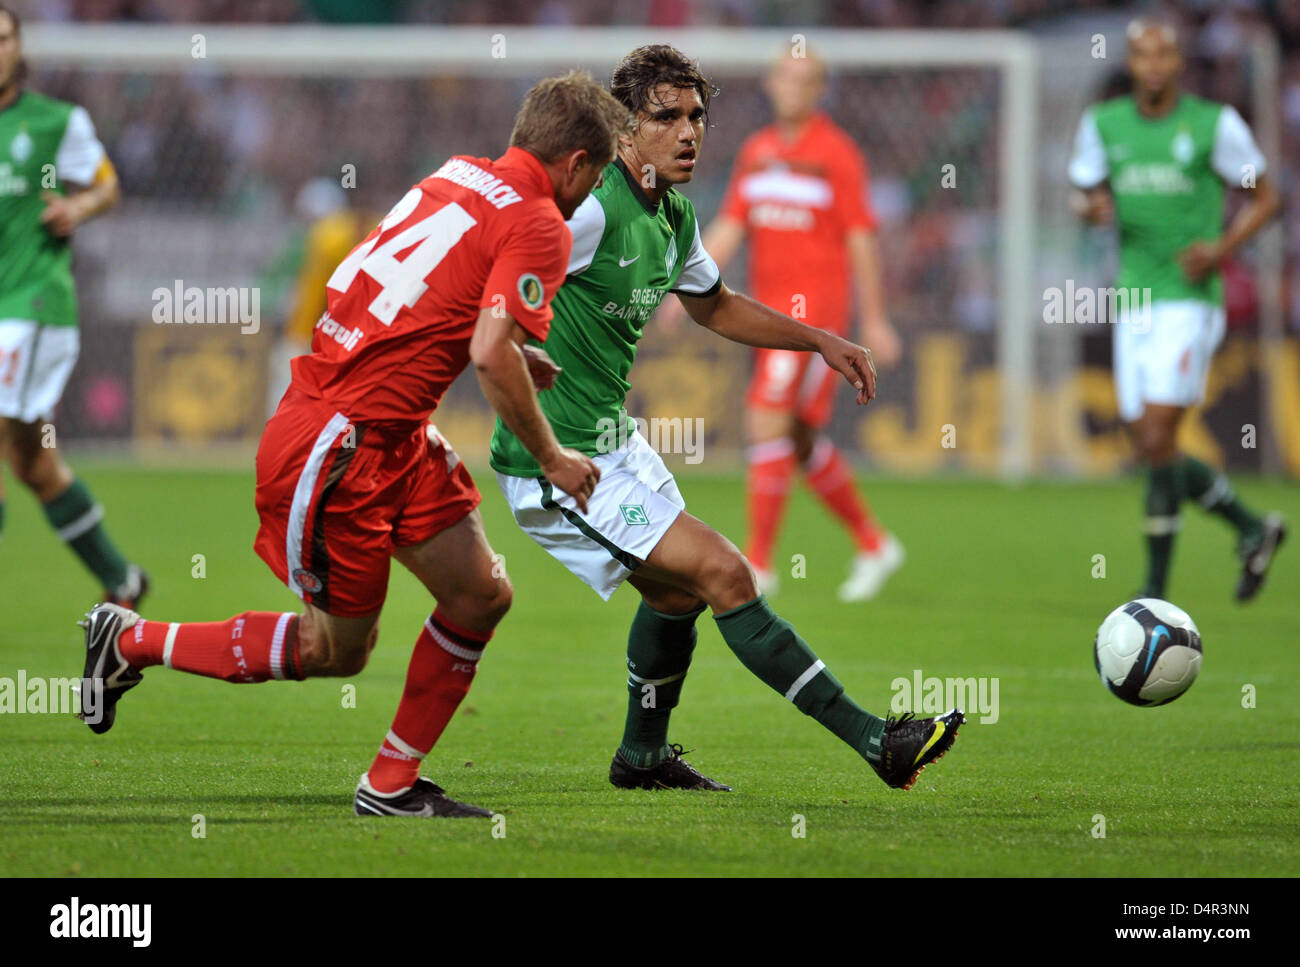 Bremen?s Marcelo Moreno (R) fights for the ball with St. Pauli?s Carsten Rothenbach during the German DFB Cup second round match Werder Bremen vs FC St. Pauli at Weser Stadium in Bremen, Germany, 23 September 2009. Bremen defeated St. Pauli 2-1. Photo: Carmen Jaspersen Stock Photo